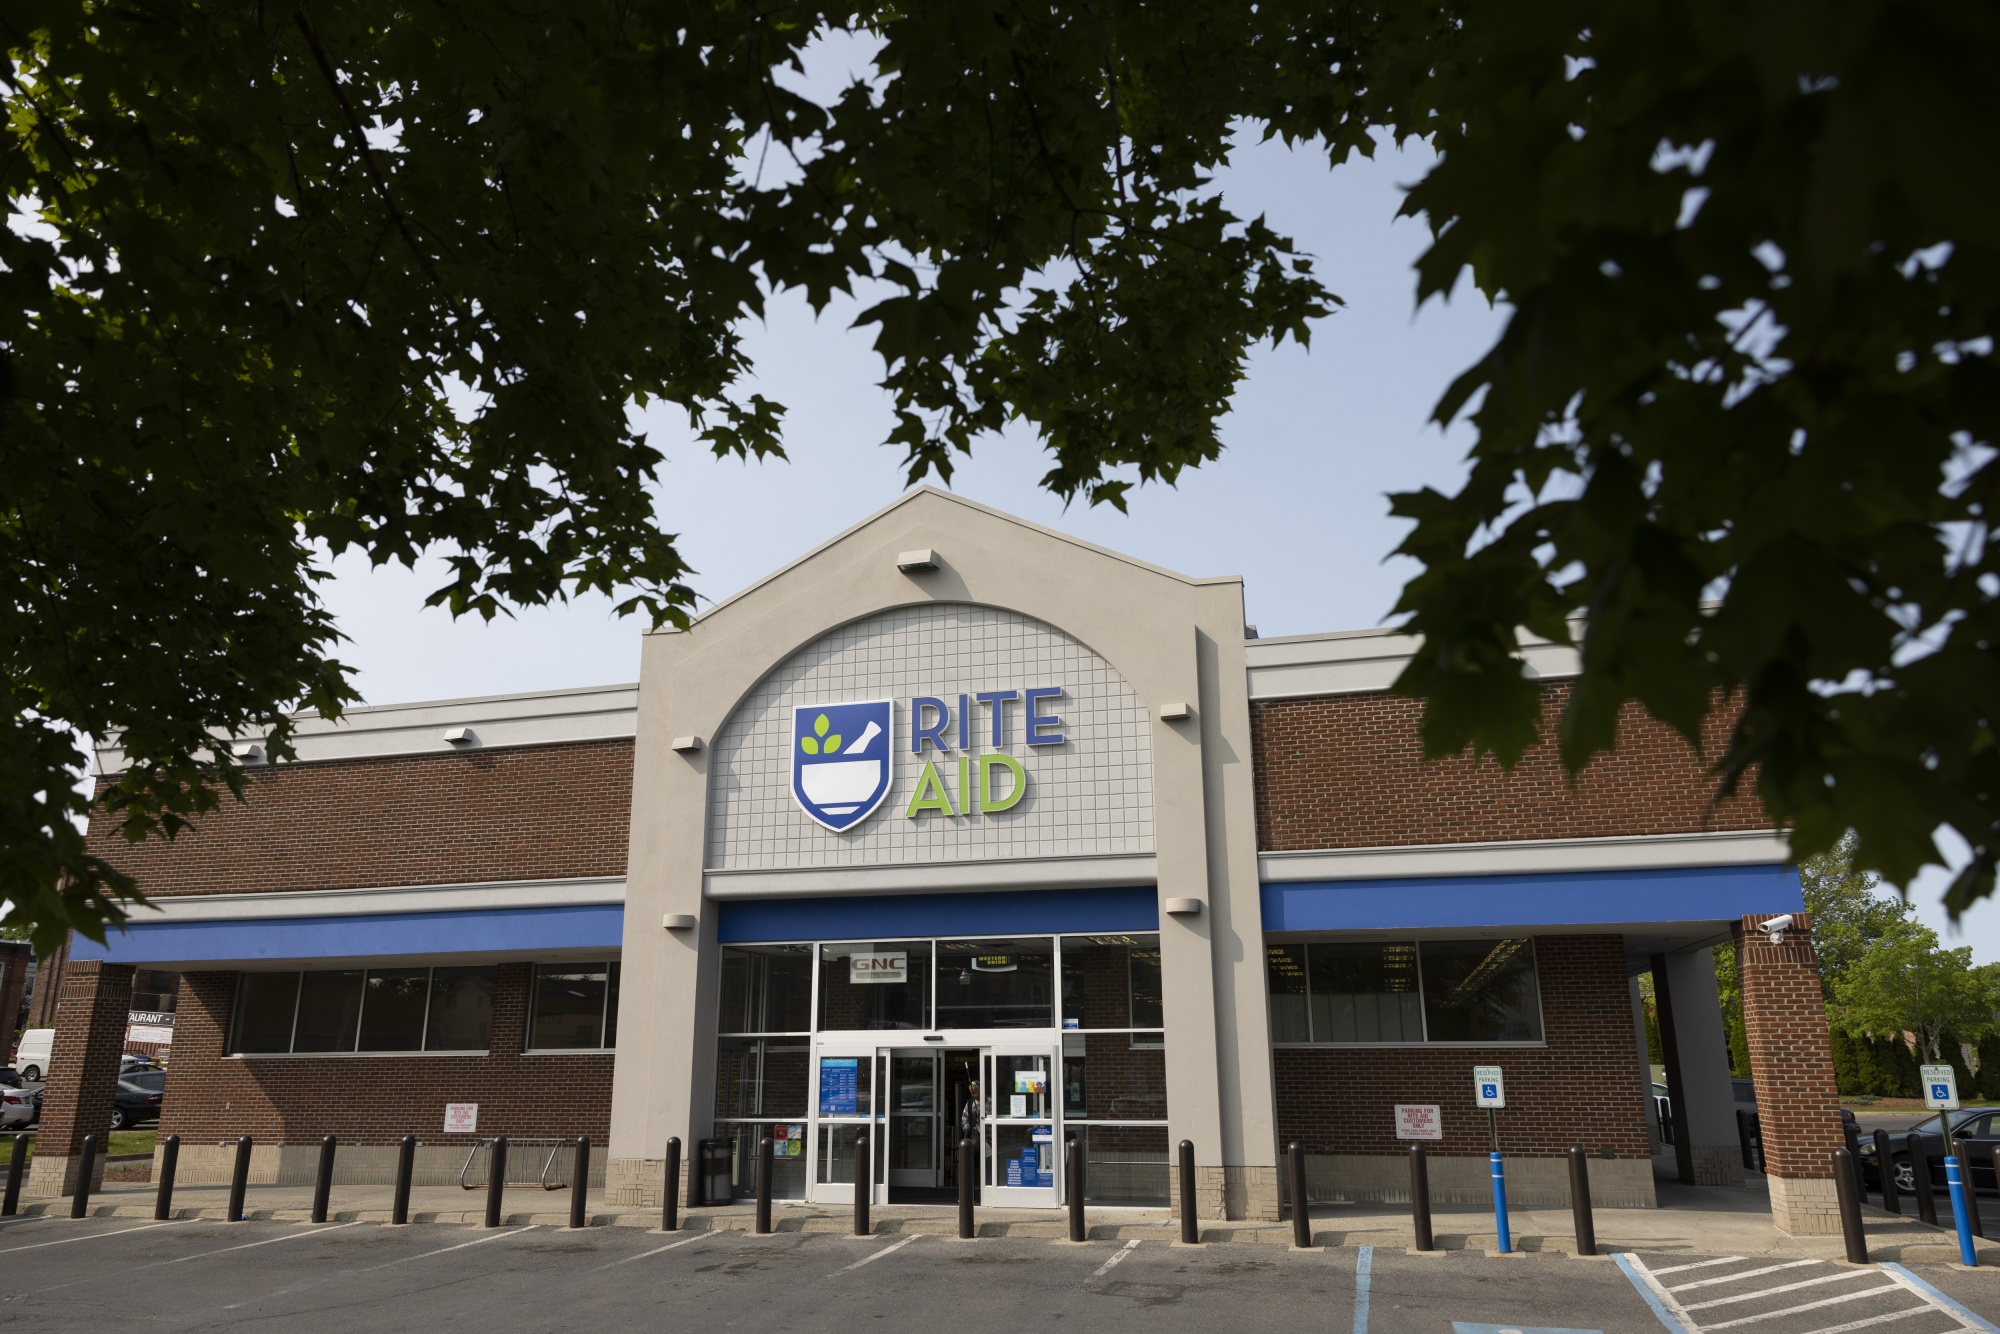 Rite Aid Loss Hits $306 Million As Troubles Mount